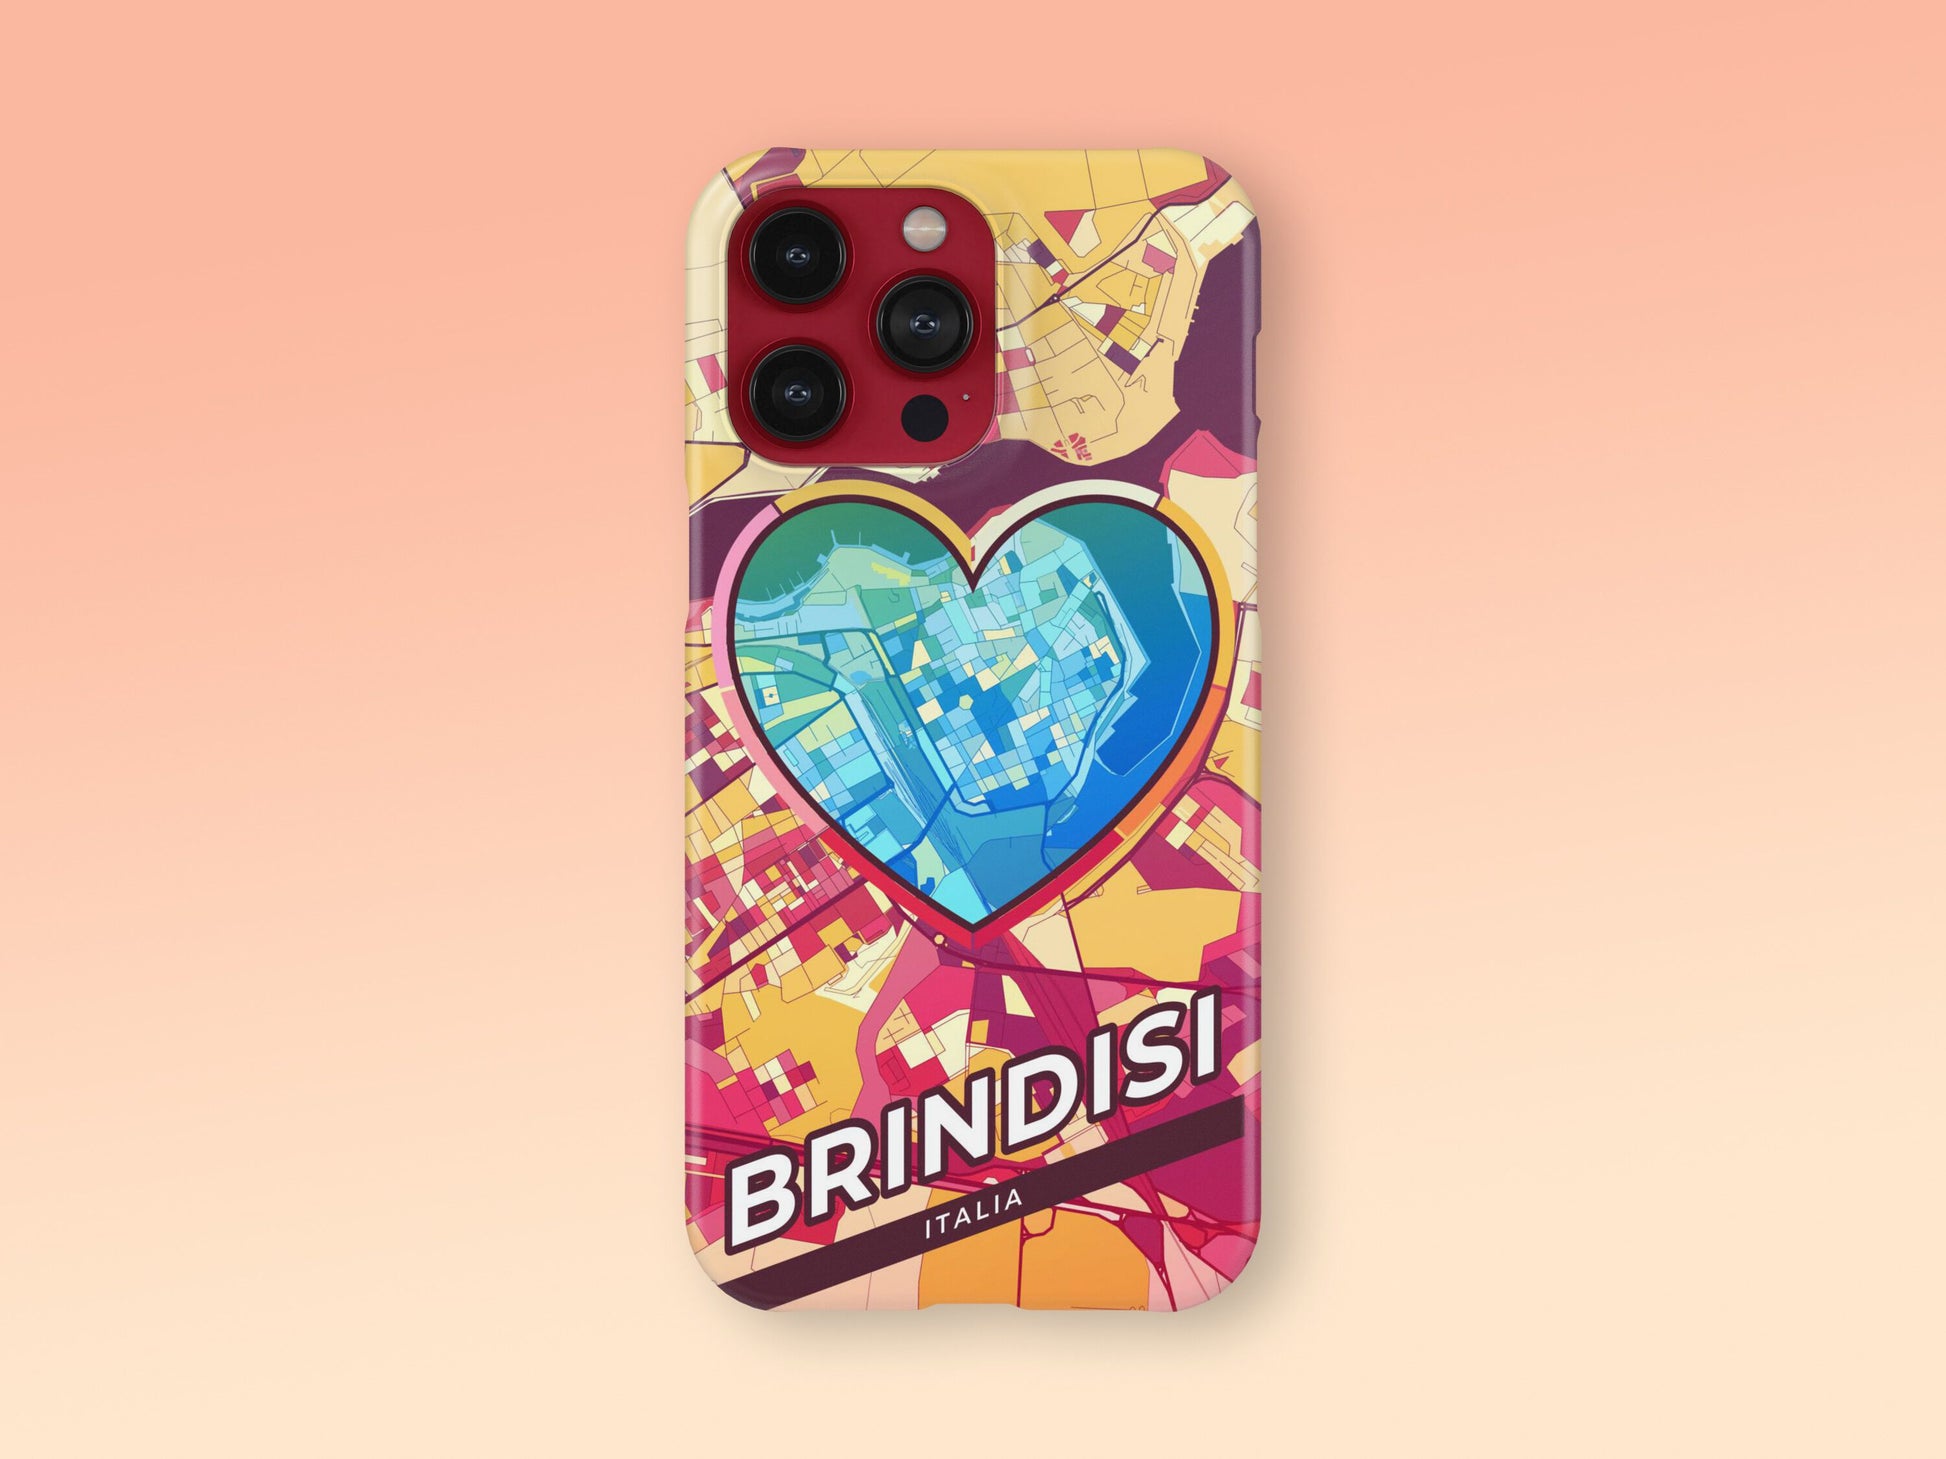 Brindisi Italy slim phone case with colorful icon. Birthday, wedding or housewarming gift. Couple match cases. 2